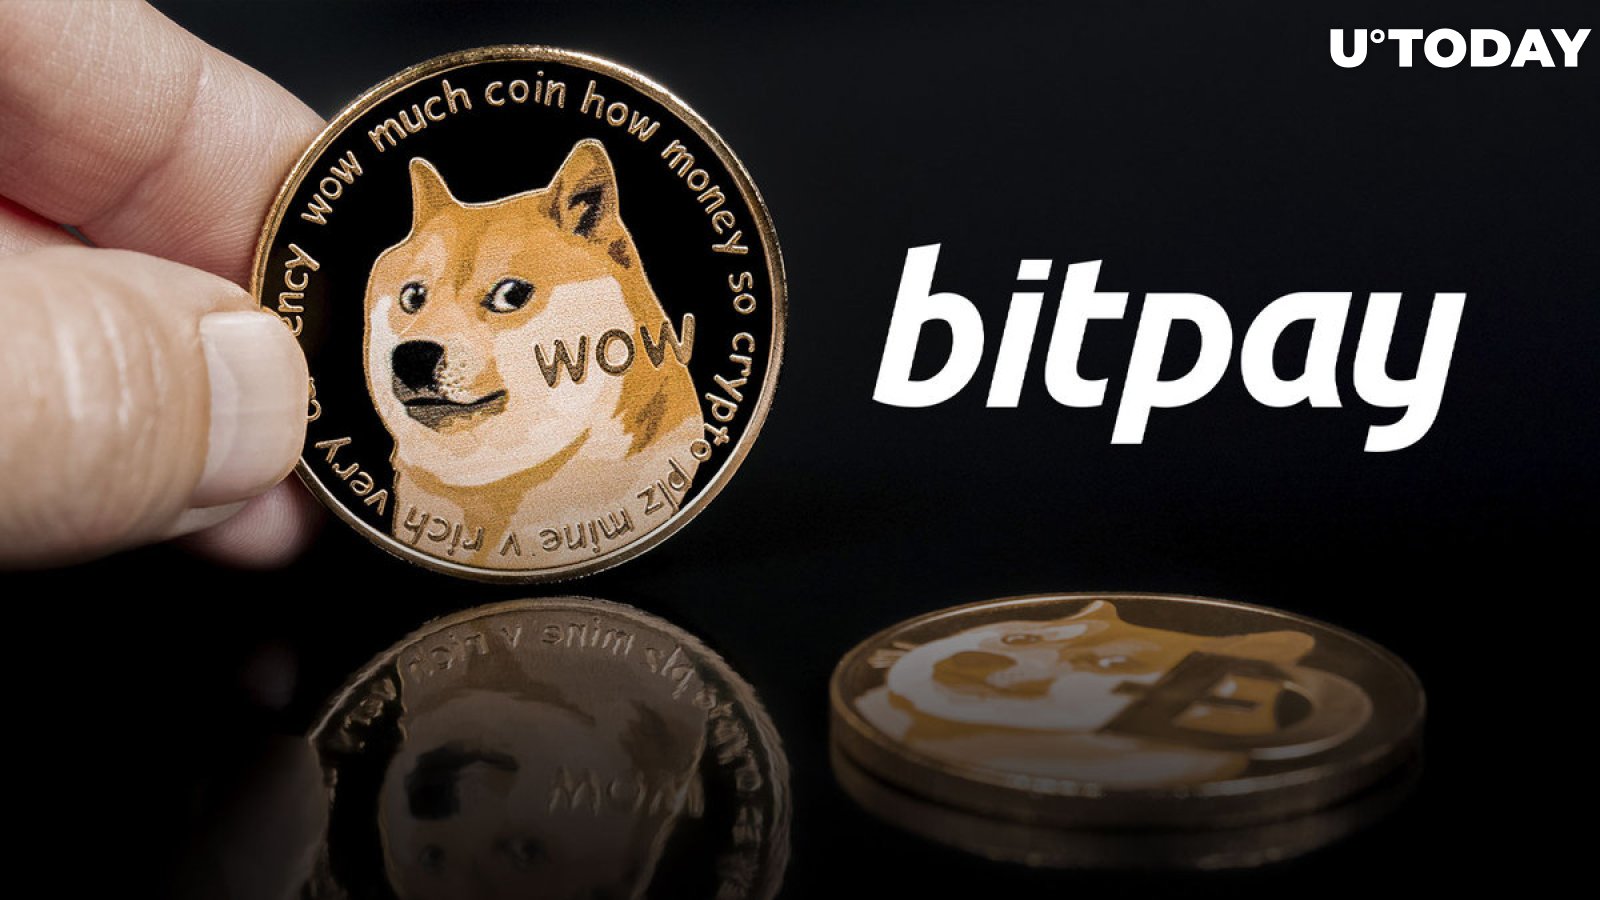 Dogecoin (DOGE) Becomes 4th Most Popular Crypto on BitPay